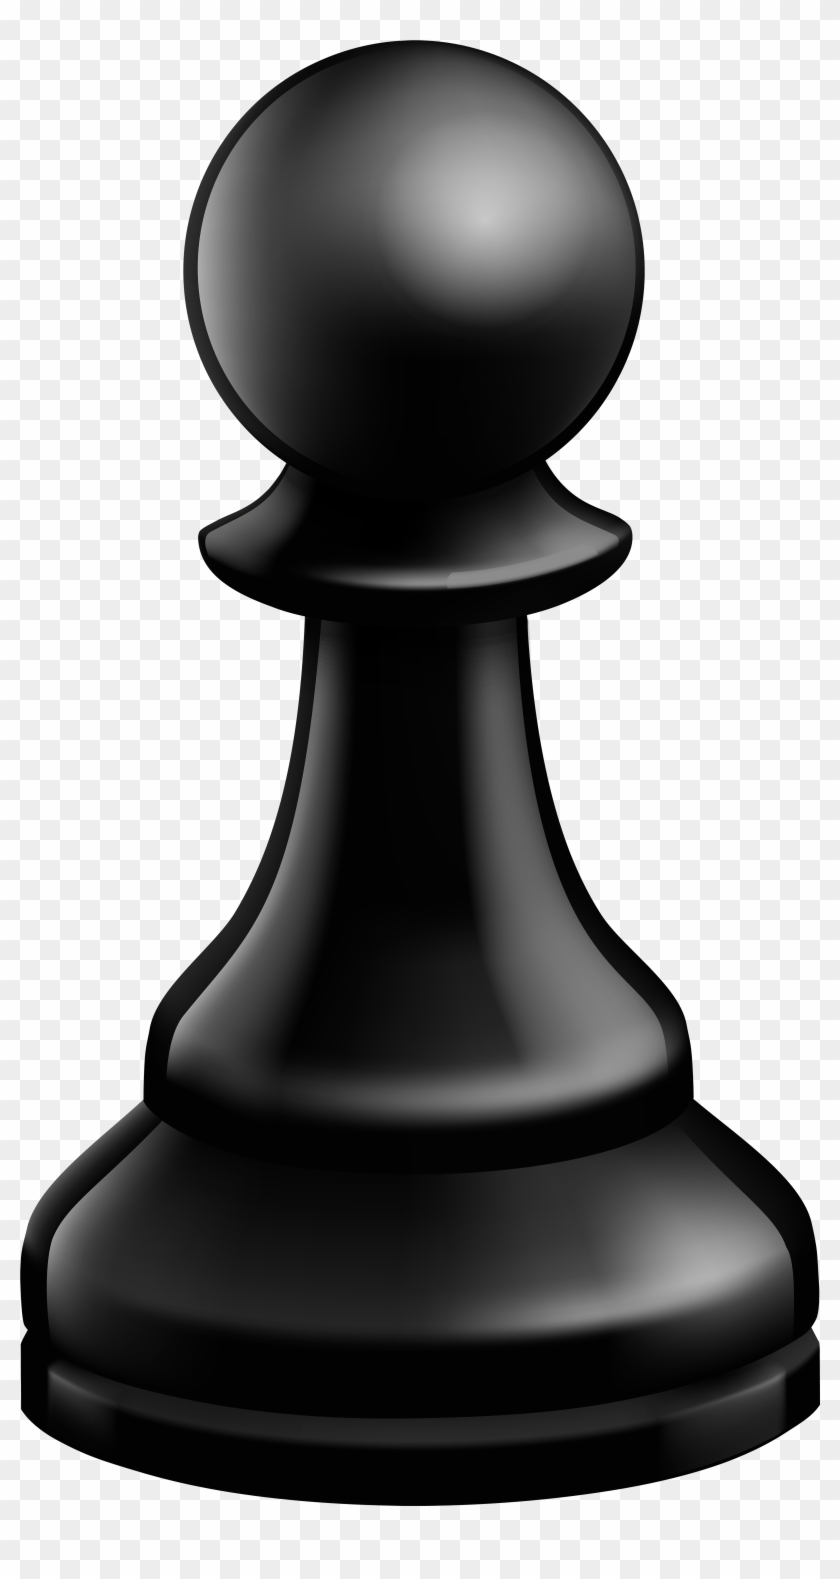 Pawn Black Chess Piece Png Clip Art - Pawn Chess Piece Png Transparent Png #2386735